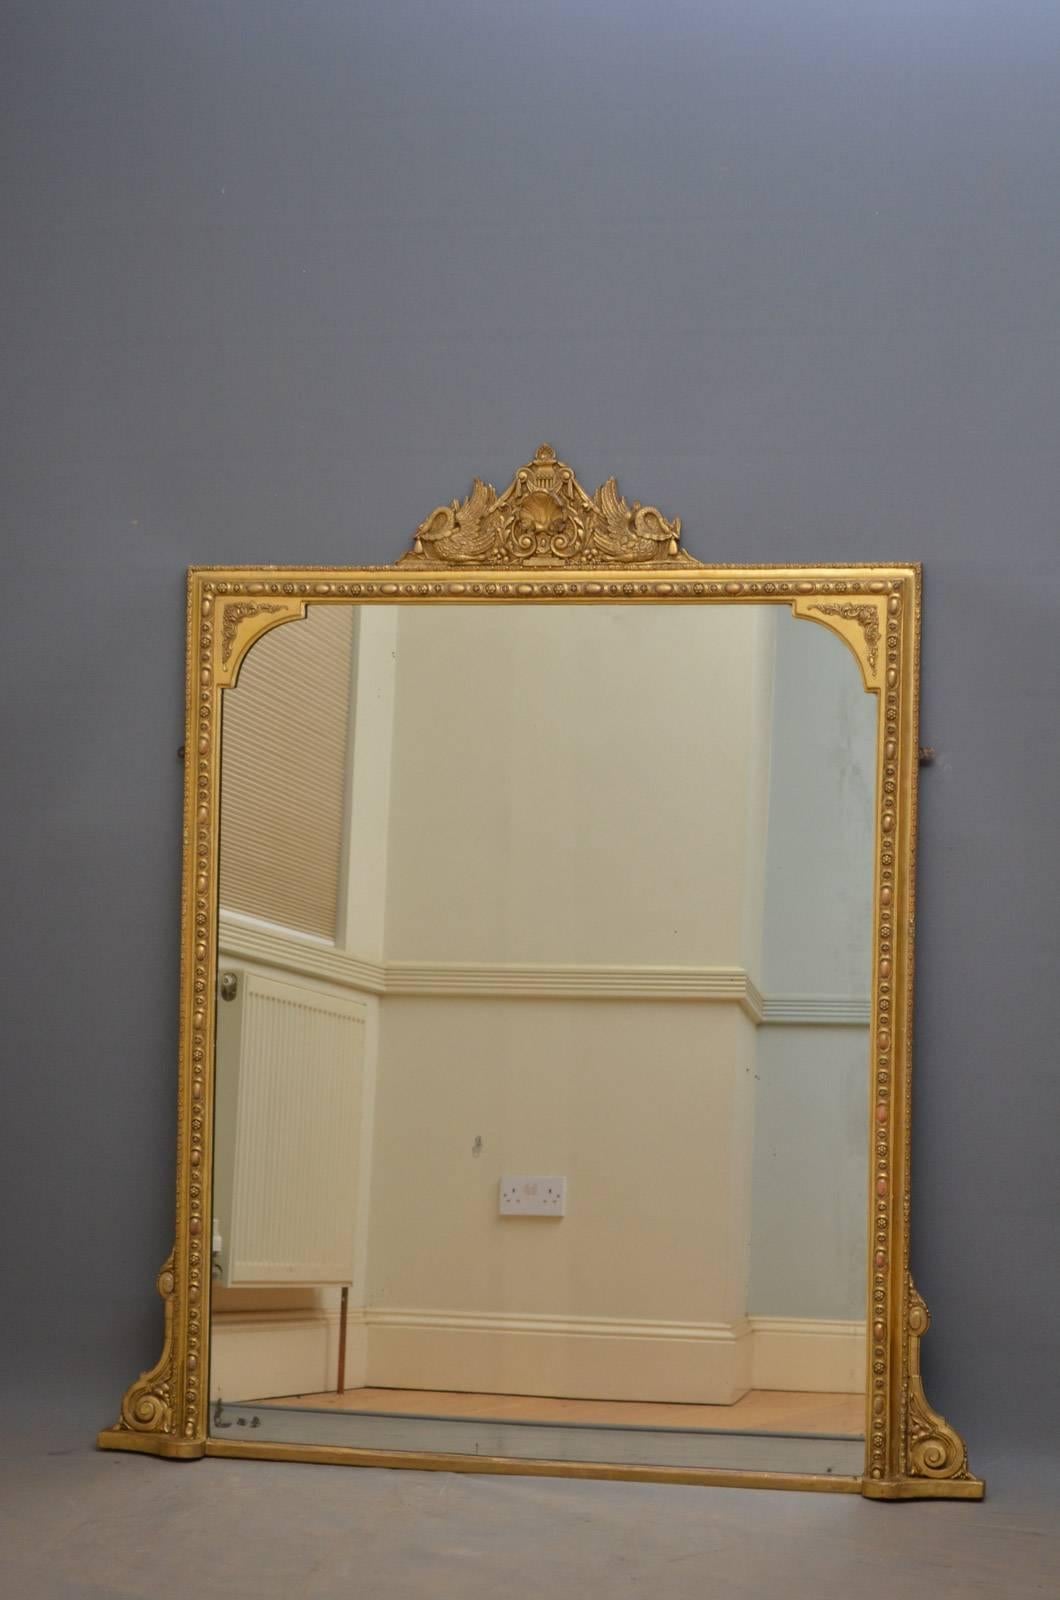 K0315 fine Victorian gilt wall mirror, having attractive cresting to the centre with swans, shell and swags and original mirror plate with foxing in finely decorated frame with scrolls to base. This antique mirror is in excellent original condition